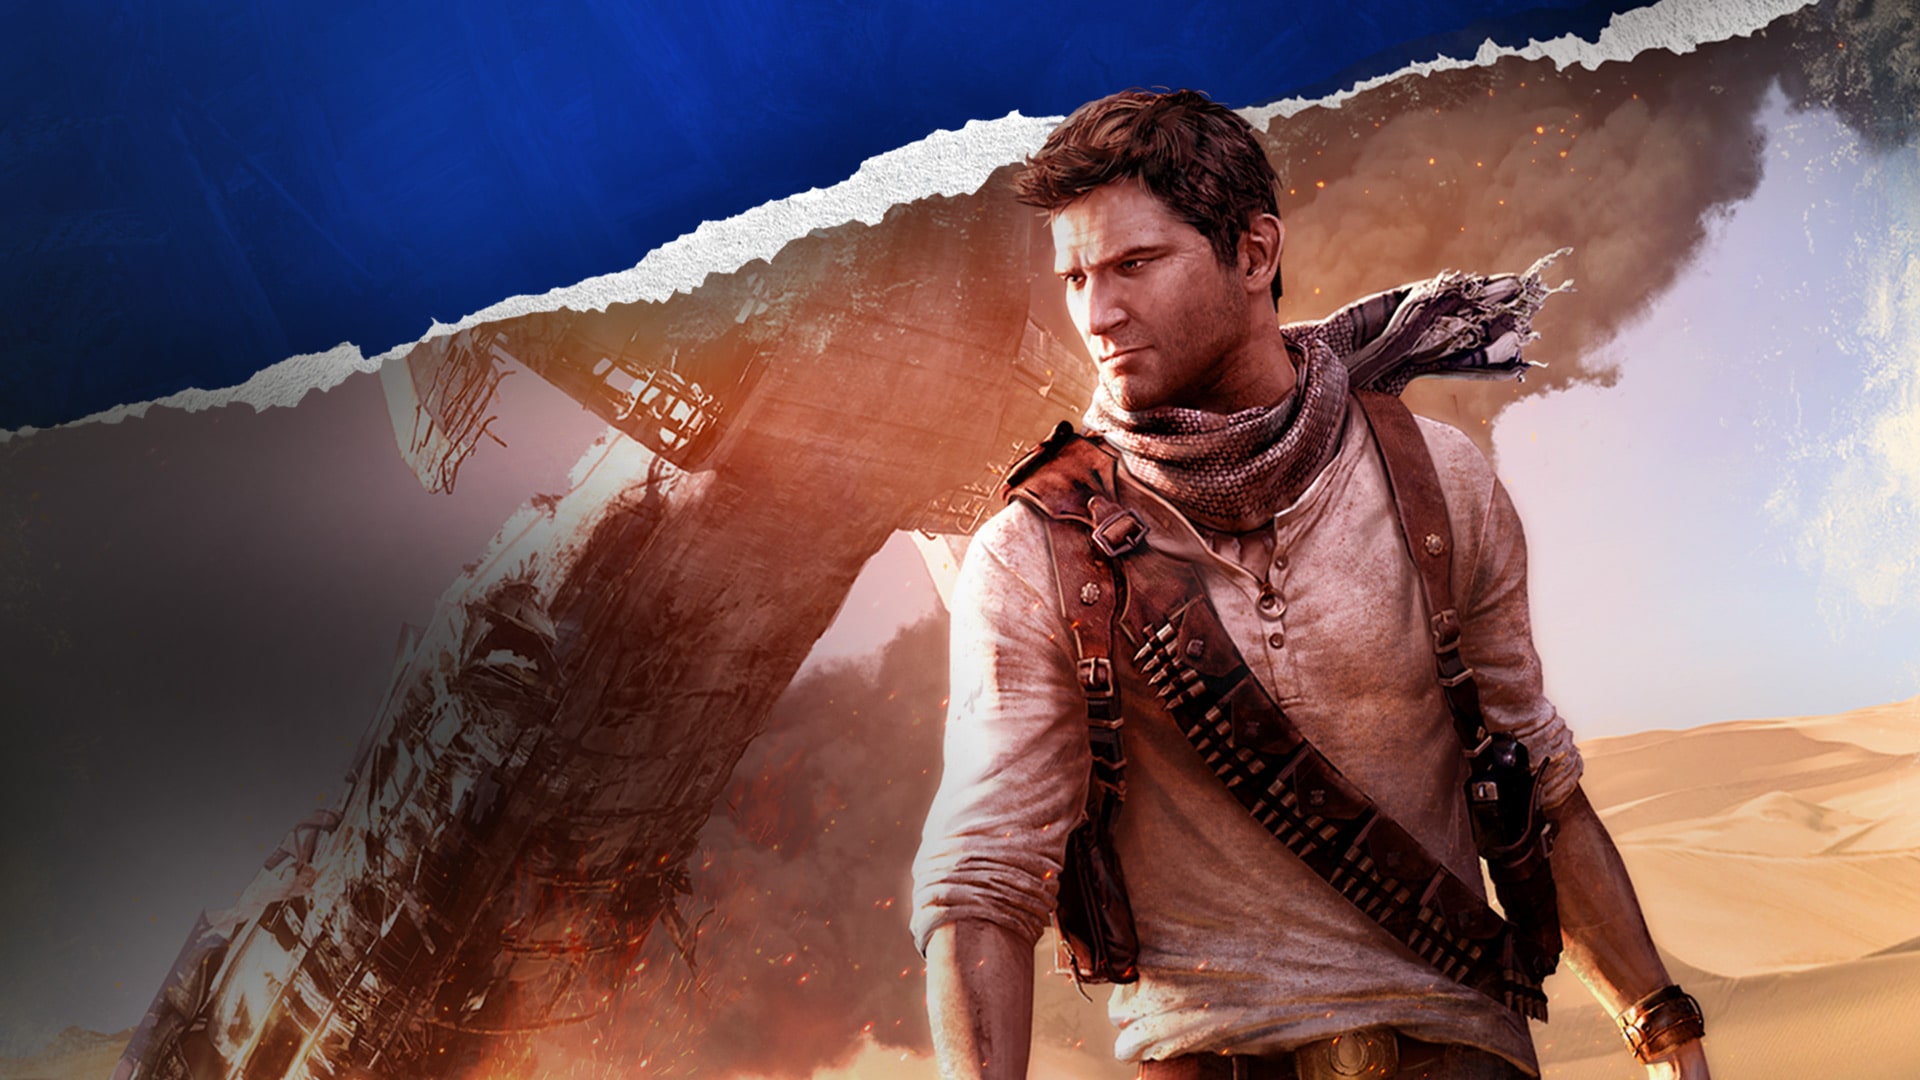 Walnut Ounce Appal Uncharted™ 3: L'inganno di Drake Remastered